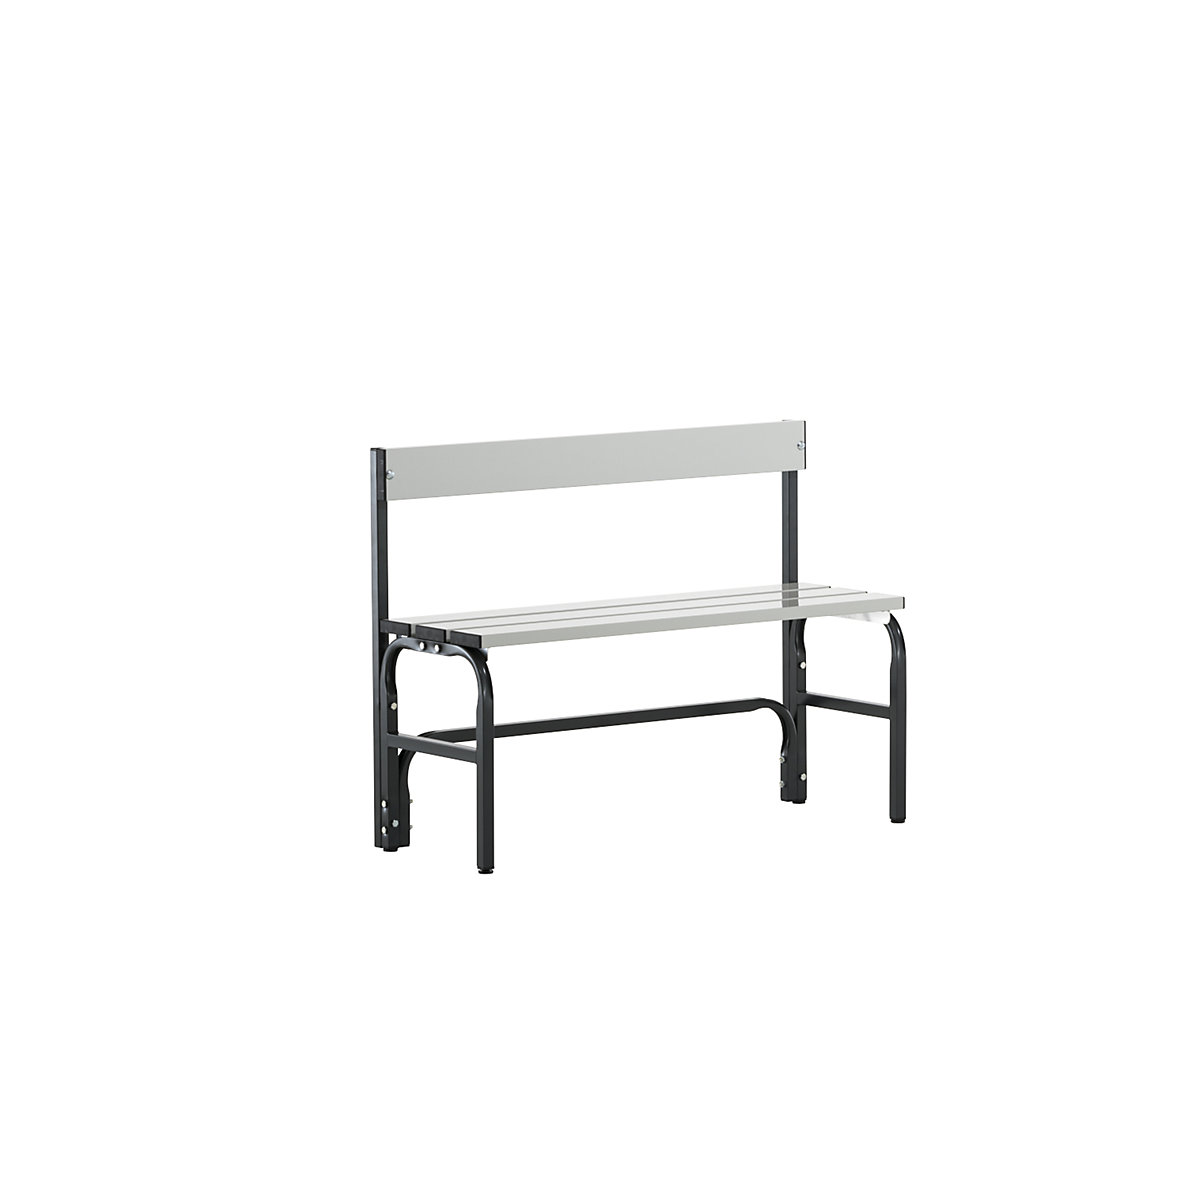 Half height cloakroom bench with back rest, single-sided – Sypro